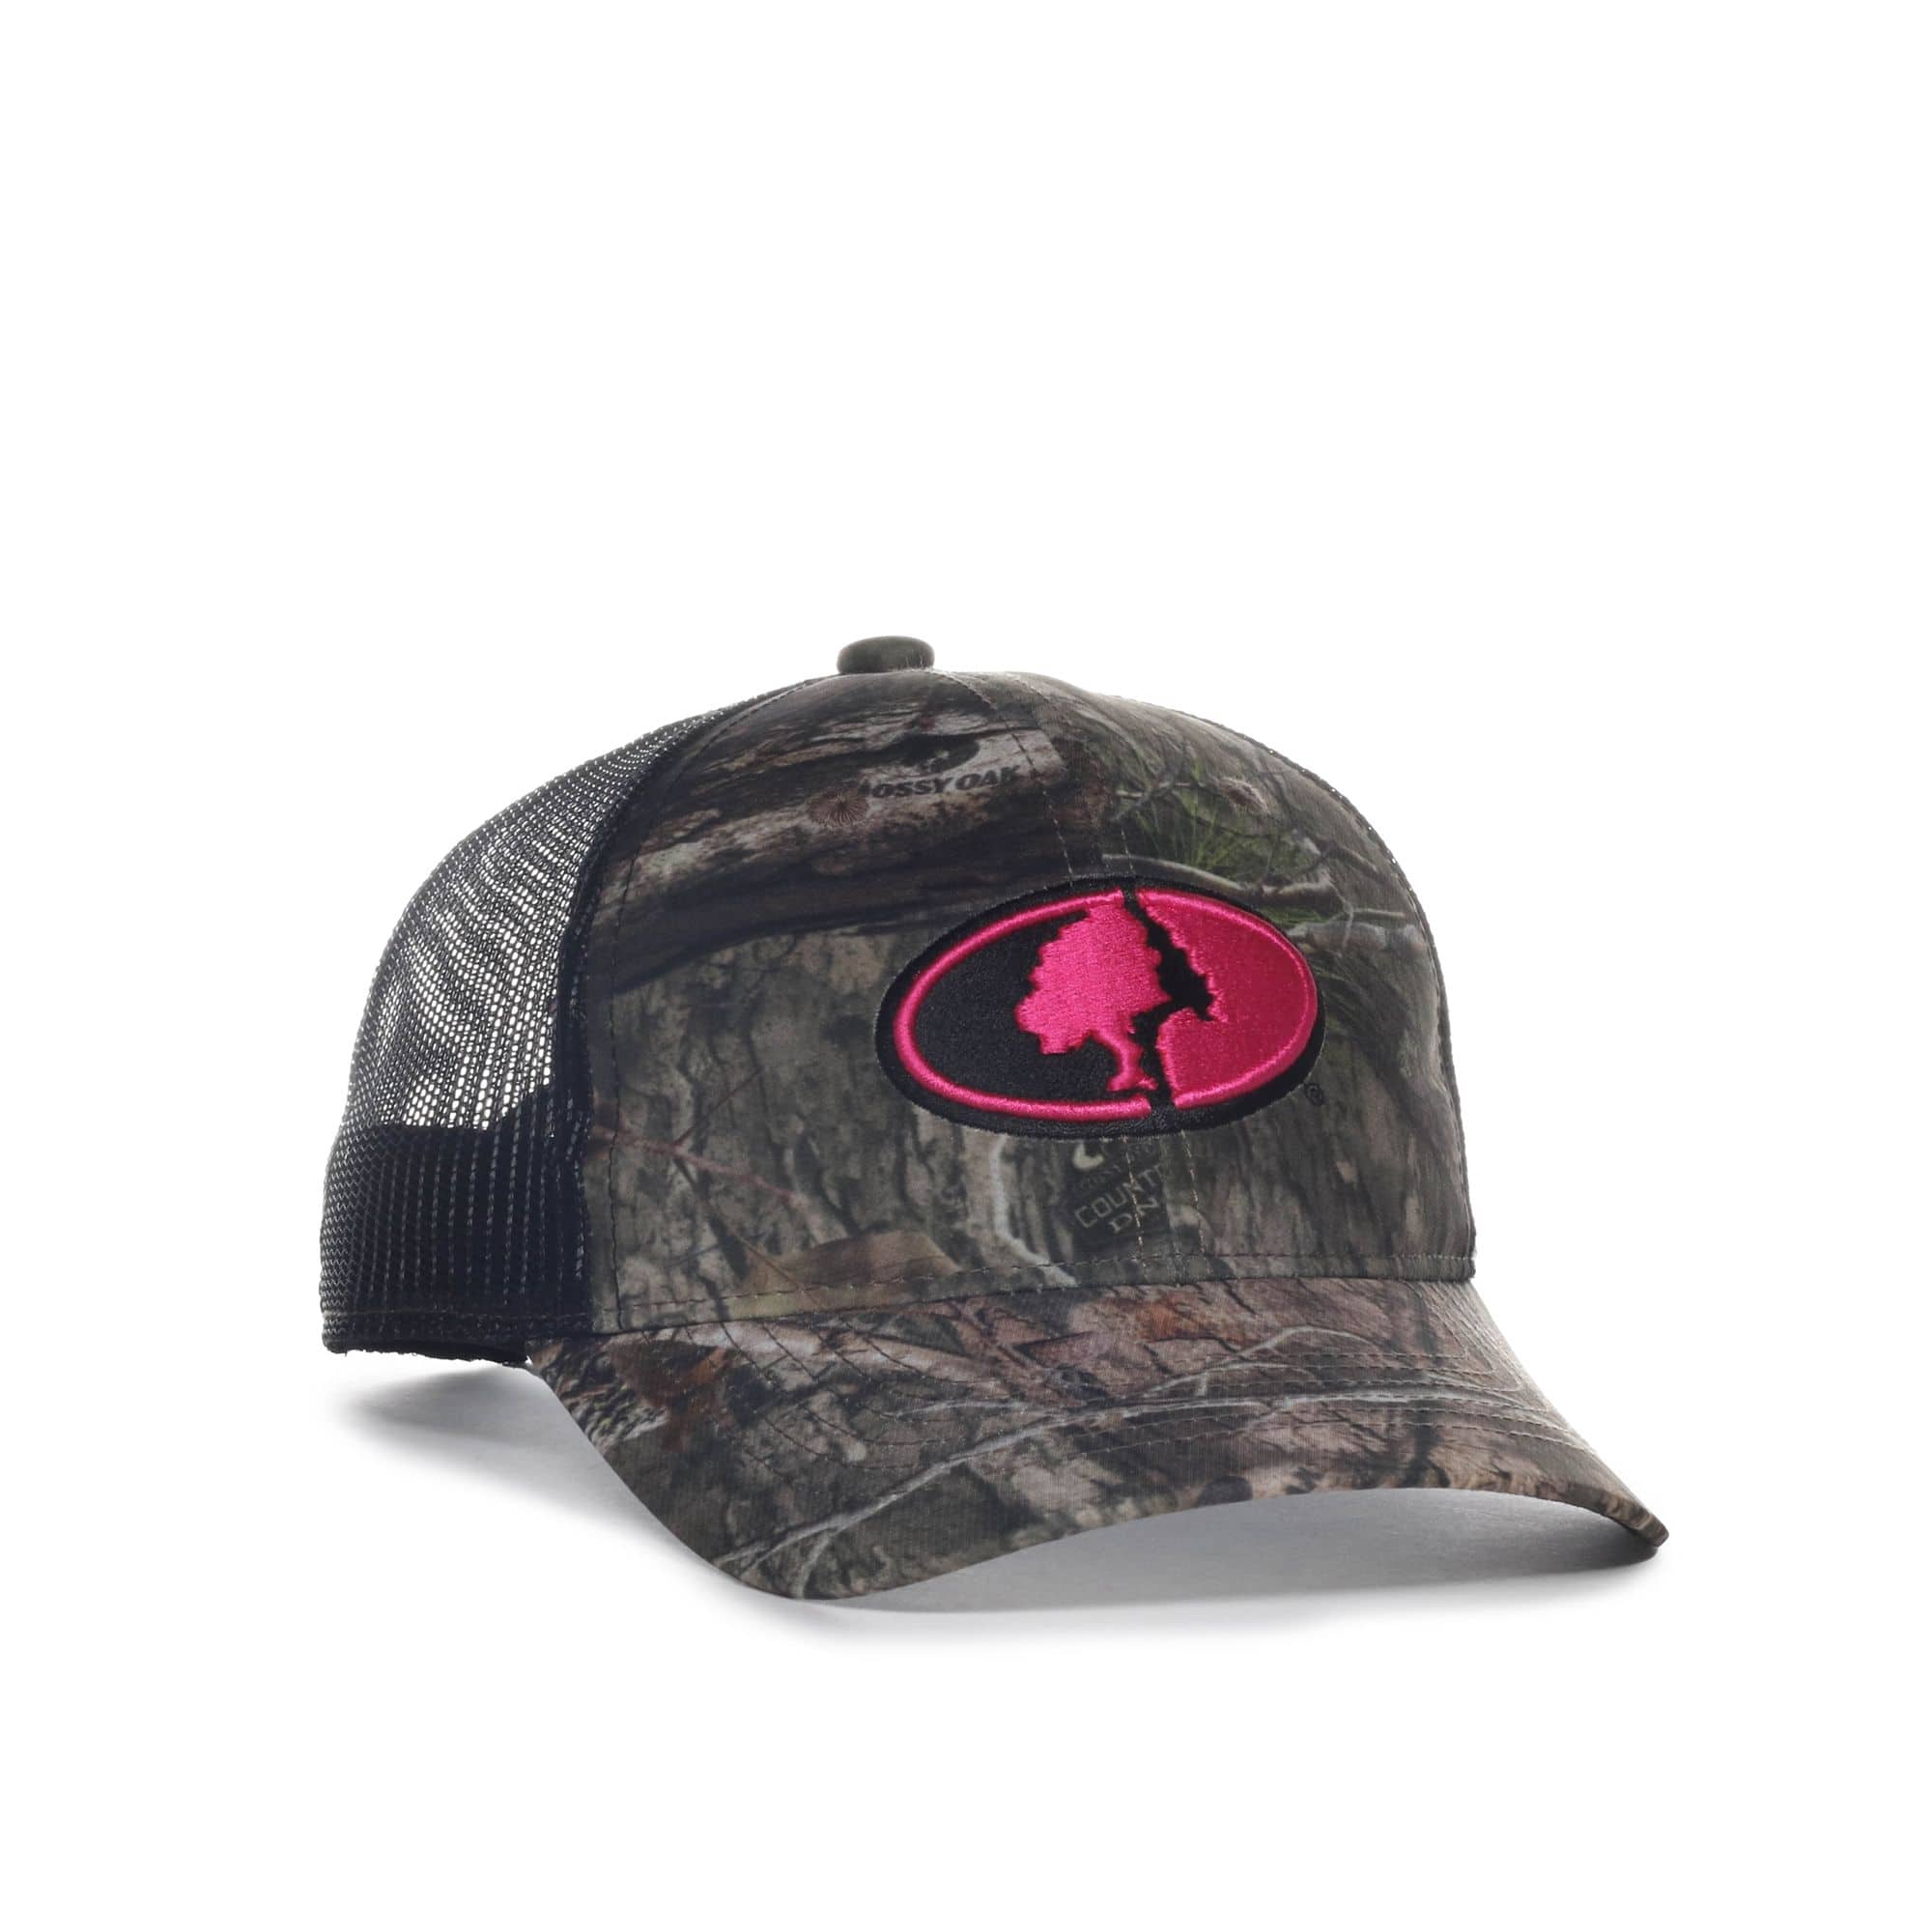 Mossy Oak Women's Country DNA Pink/Black Logo Mesh Baseball Cap with Snap  Closure, One Size